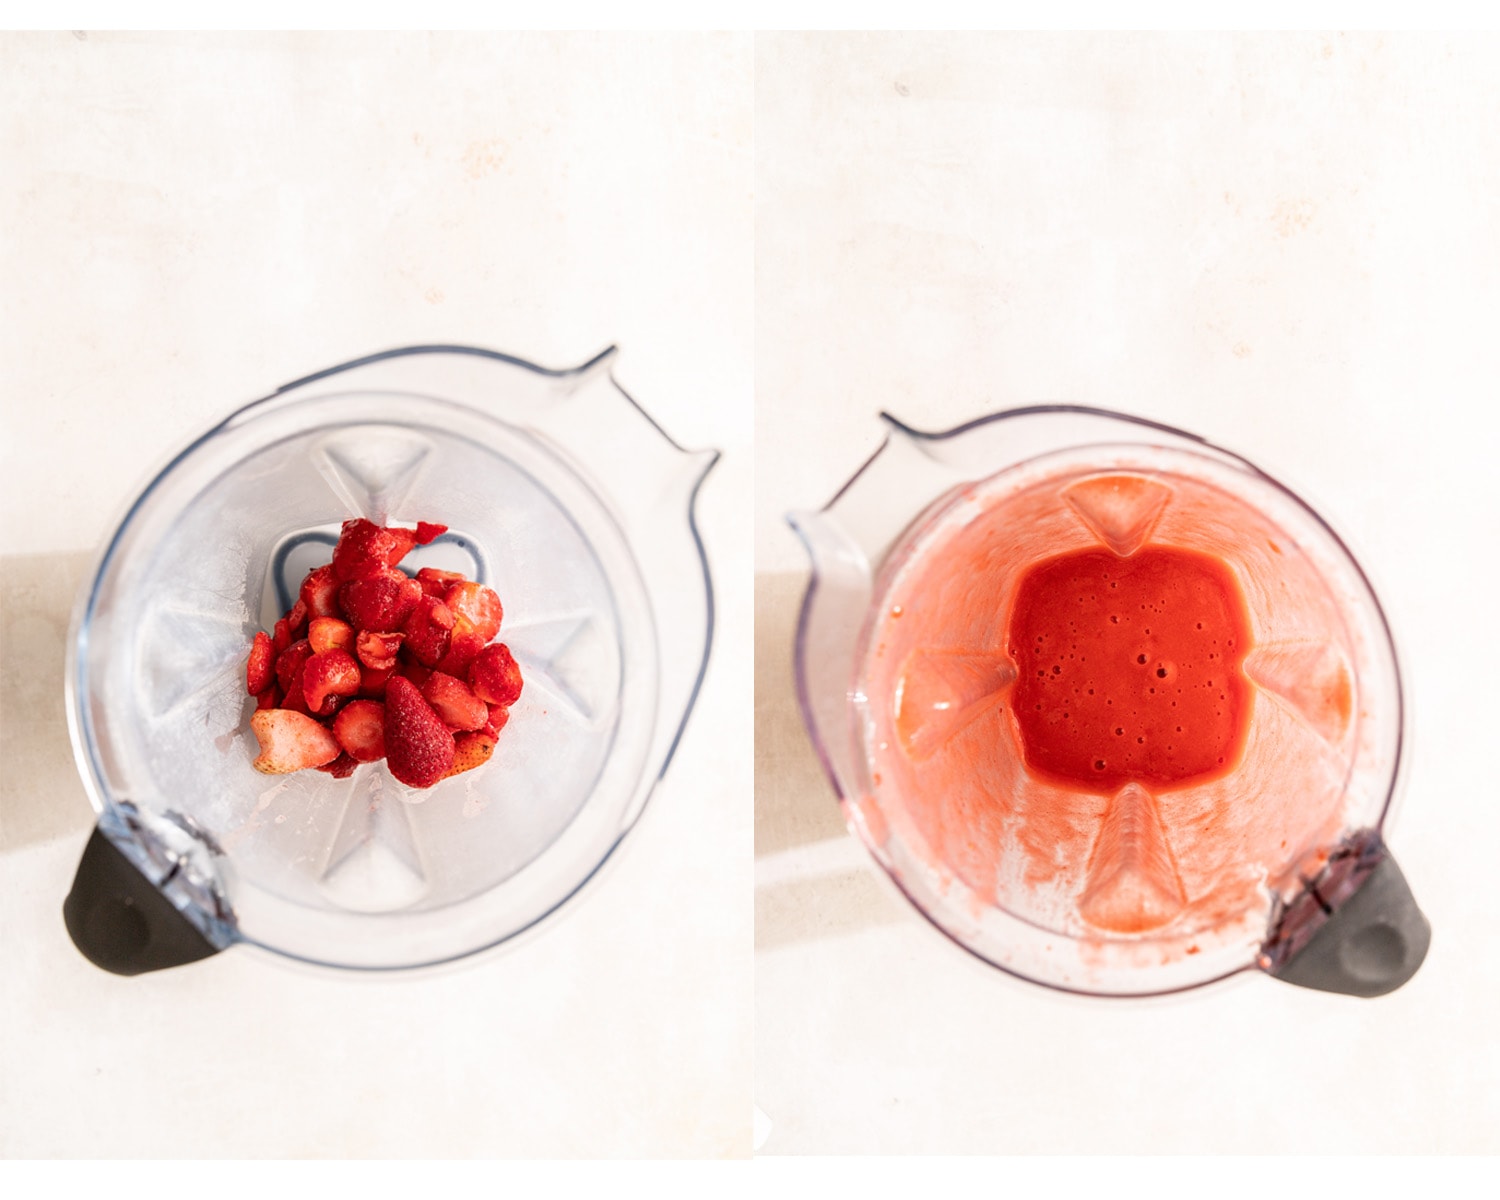 Process images showing hot to make fresh strawberry sauce.